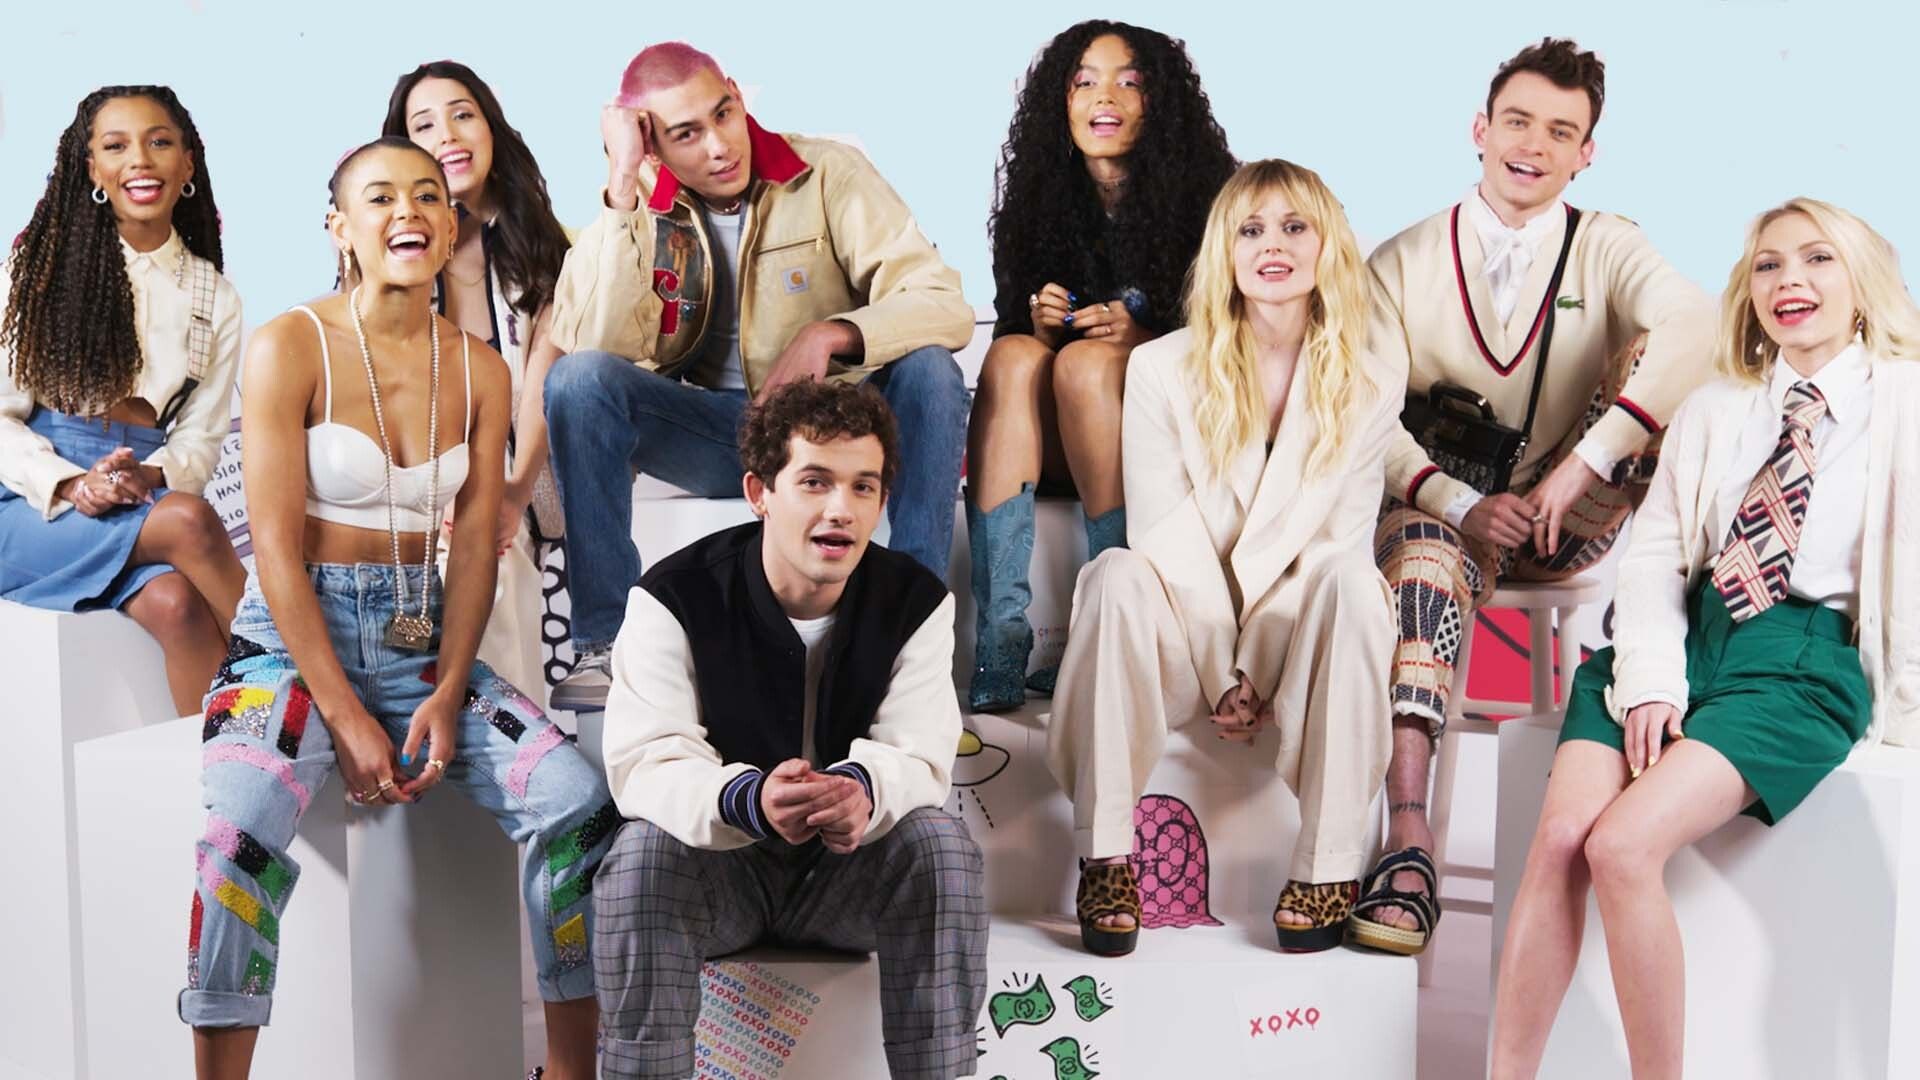 Get to know the cast of HBO Max's 'Gossip Girl' reboot